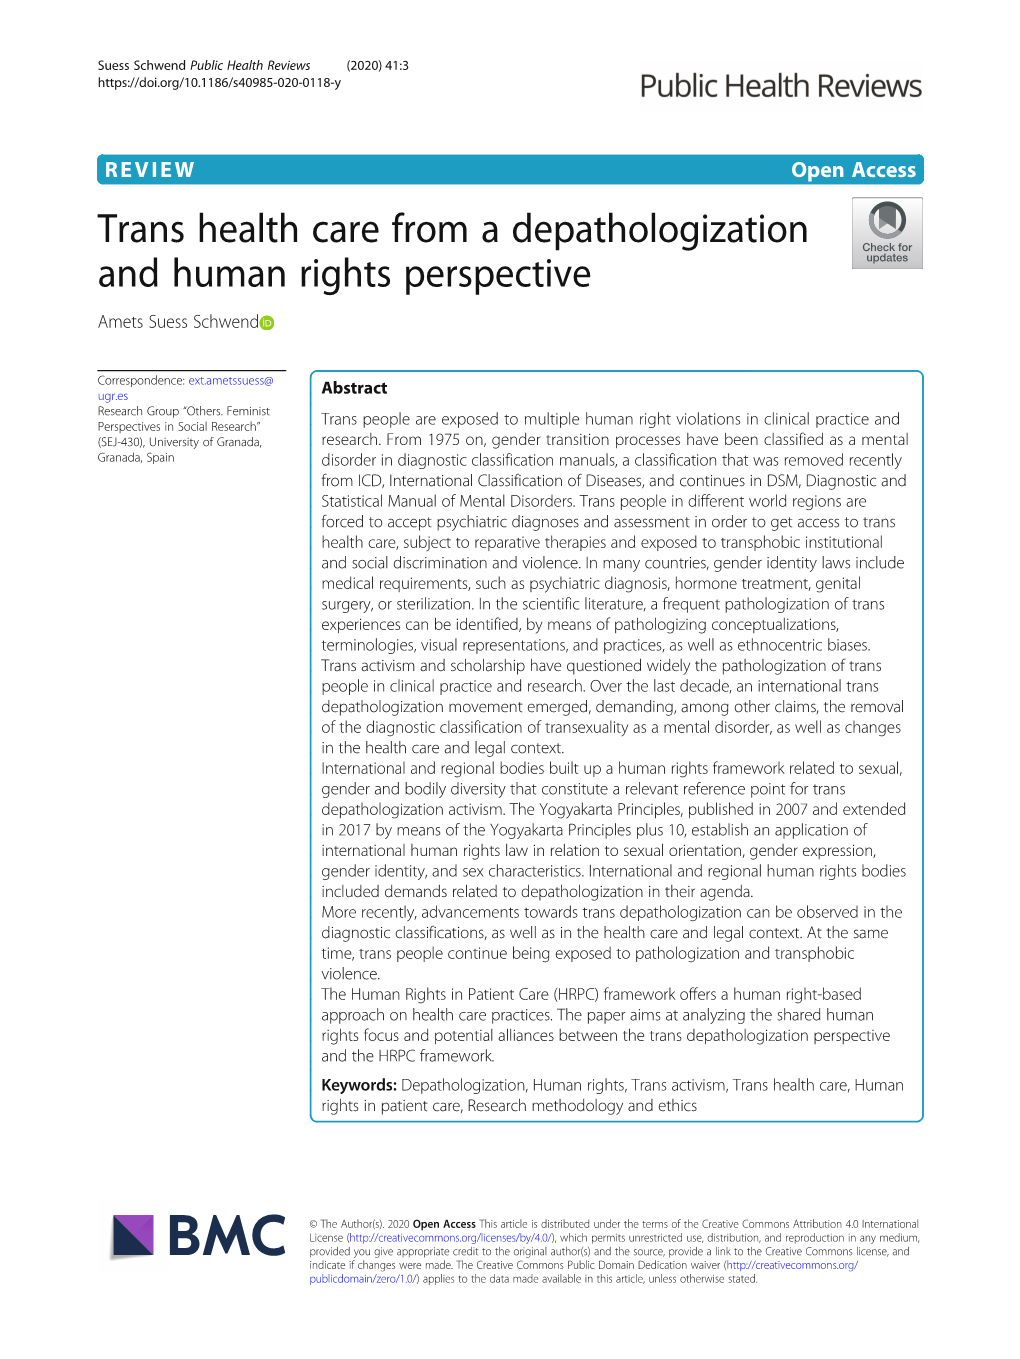 Trans Health Care from a Depathologization and Human Rights Perspective Amets Suess Schwend